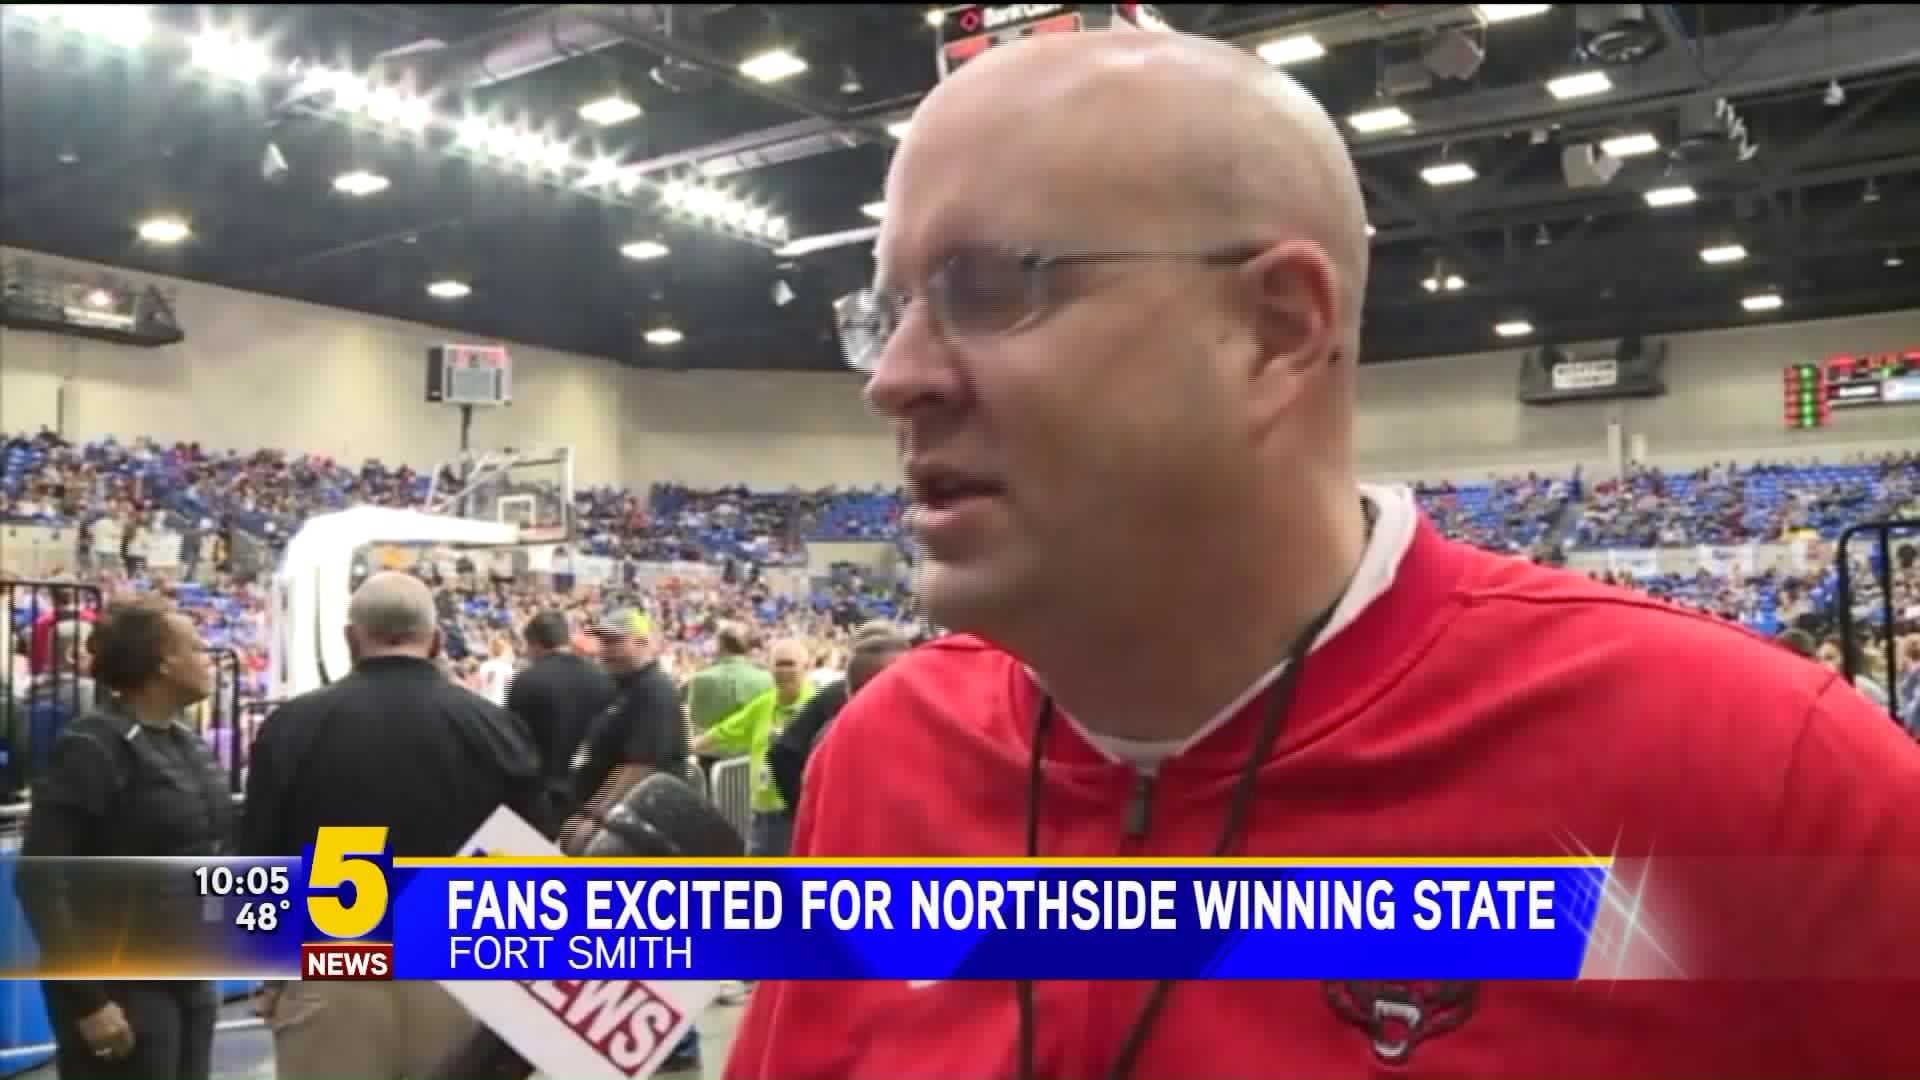 Fans Excited For Northside State Win